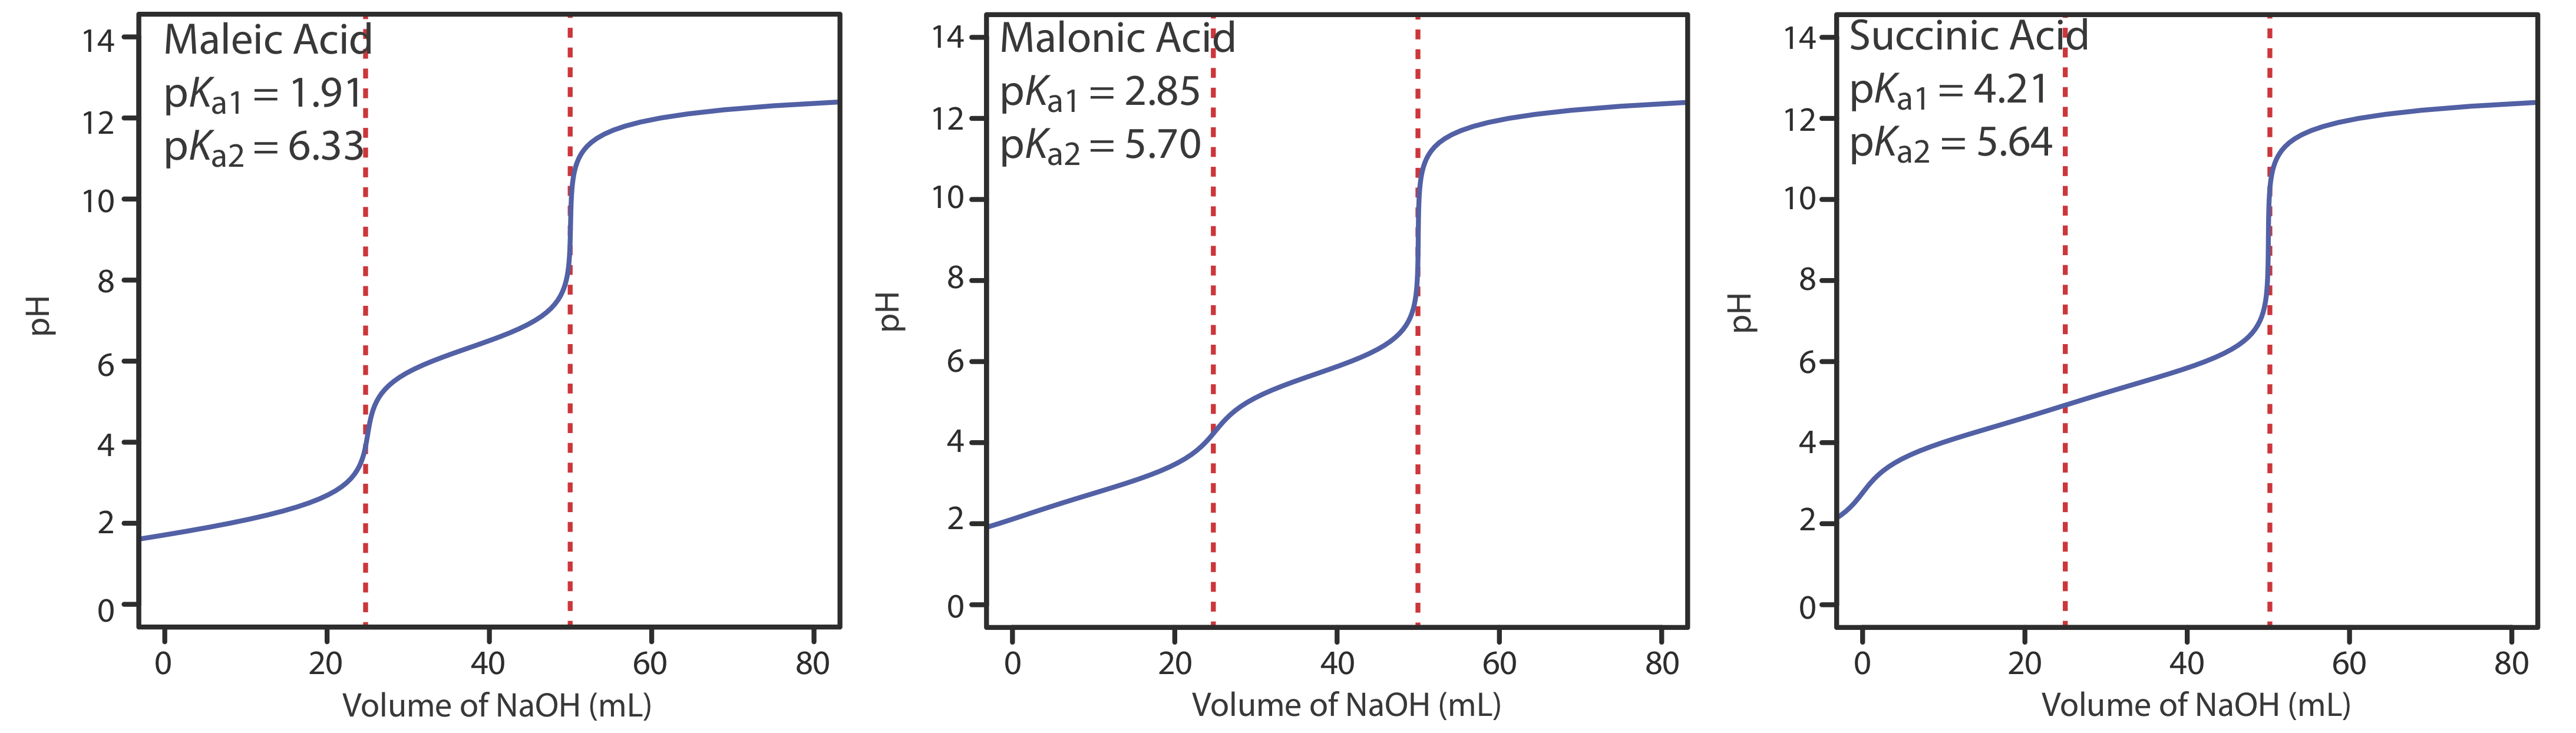 Maleic Acid has a pKa1 of 1.91 and a pKa2 of 6.33. Malonic Acid has a pKa1 of 2.85 and a pKa2 of 5.70. Succinic Acid has a pKa1 of and a pKa2 of 5.64.4.21